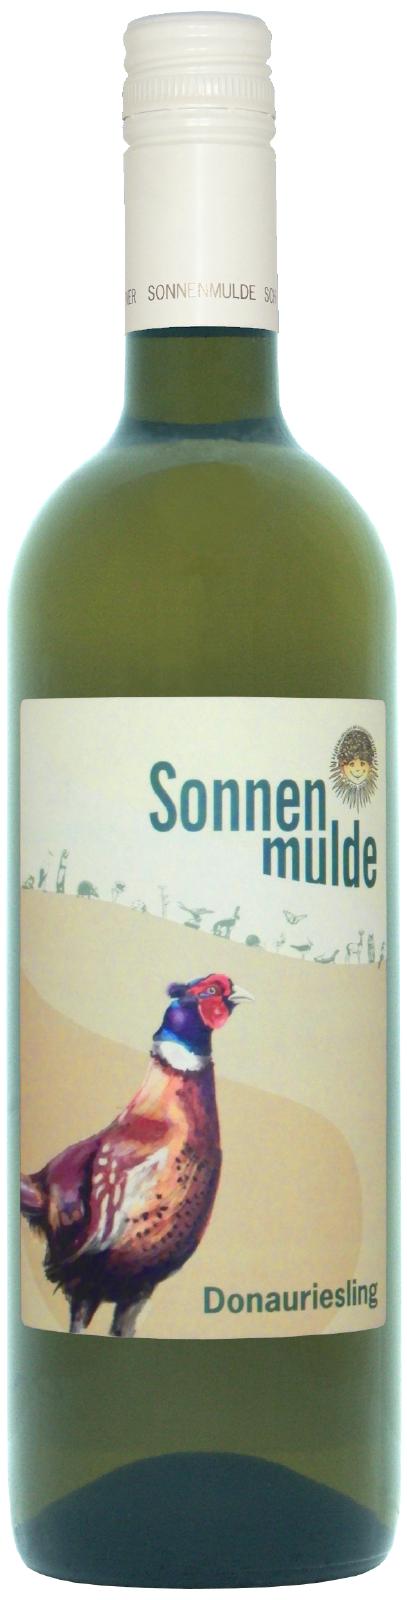 A bottle of Donauriesling